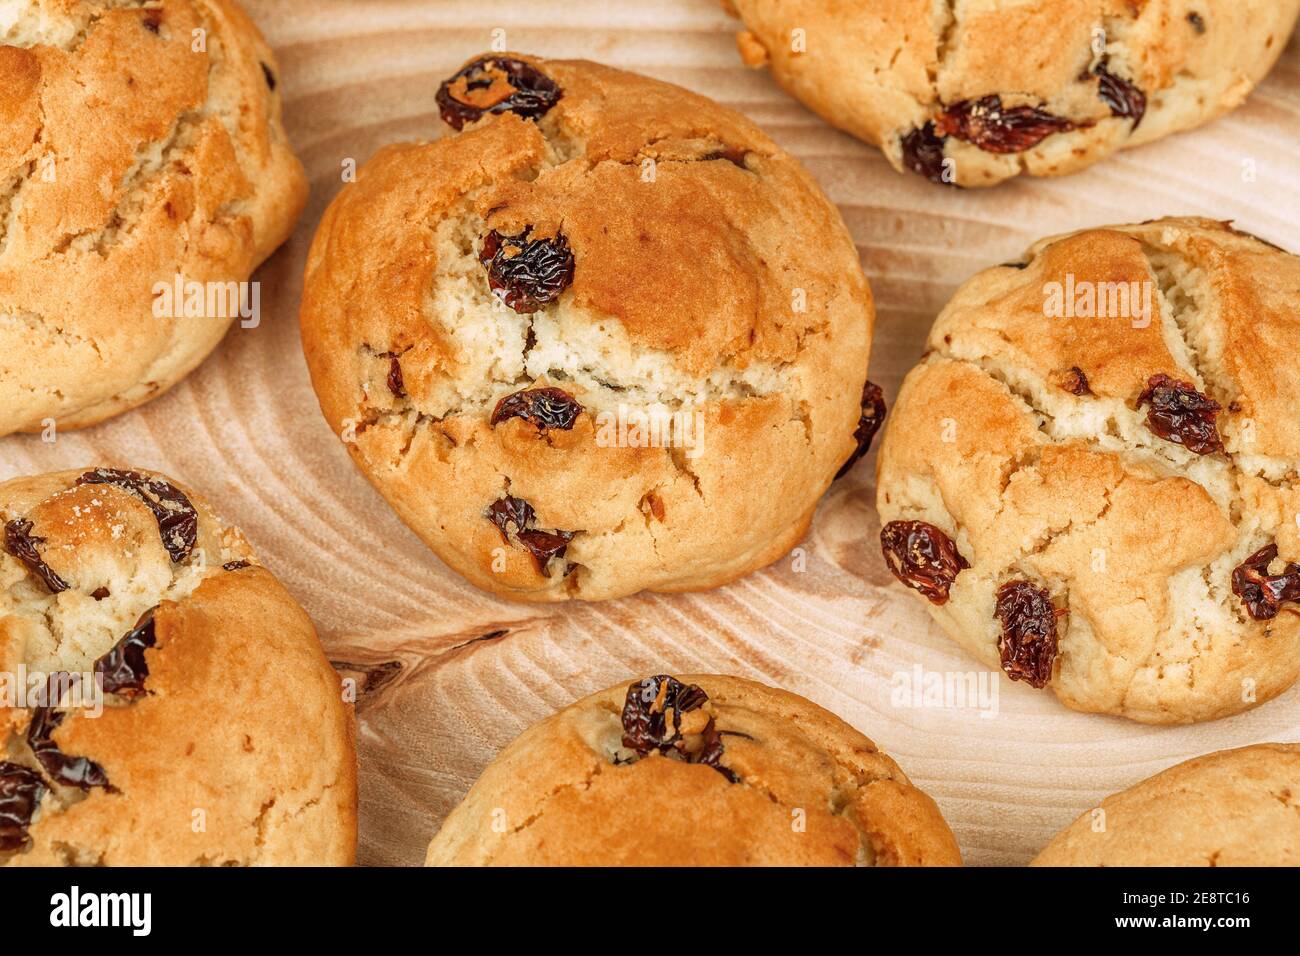 Plenty of raisin cookies on a wooden plate background, detailed view Stock Photo